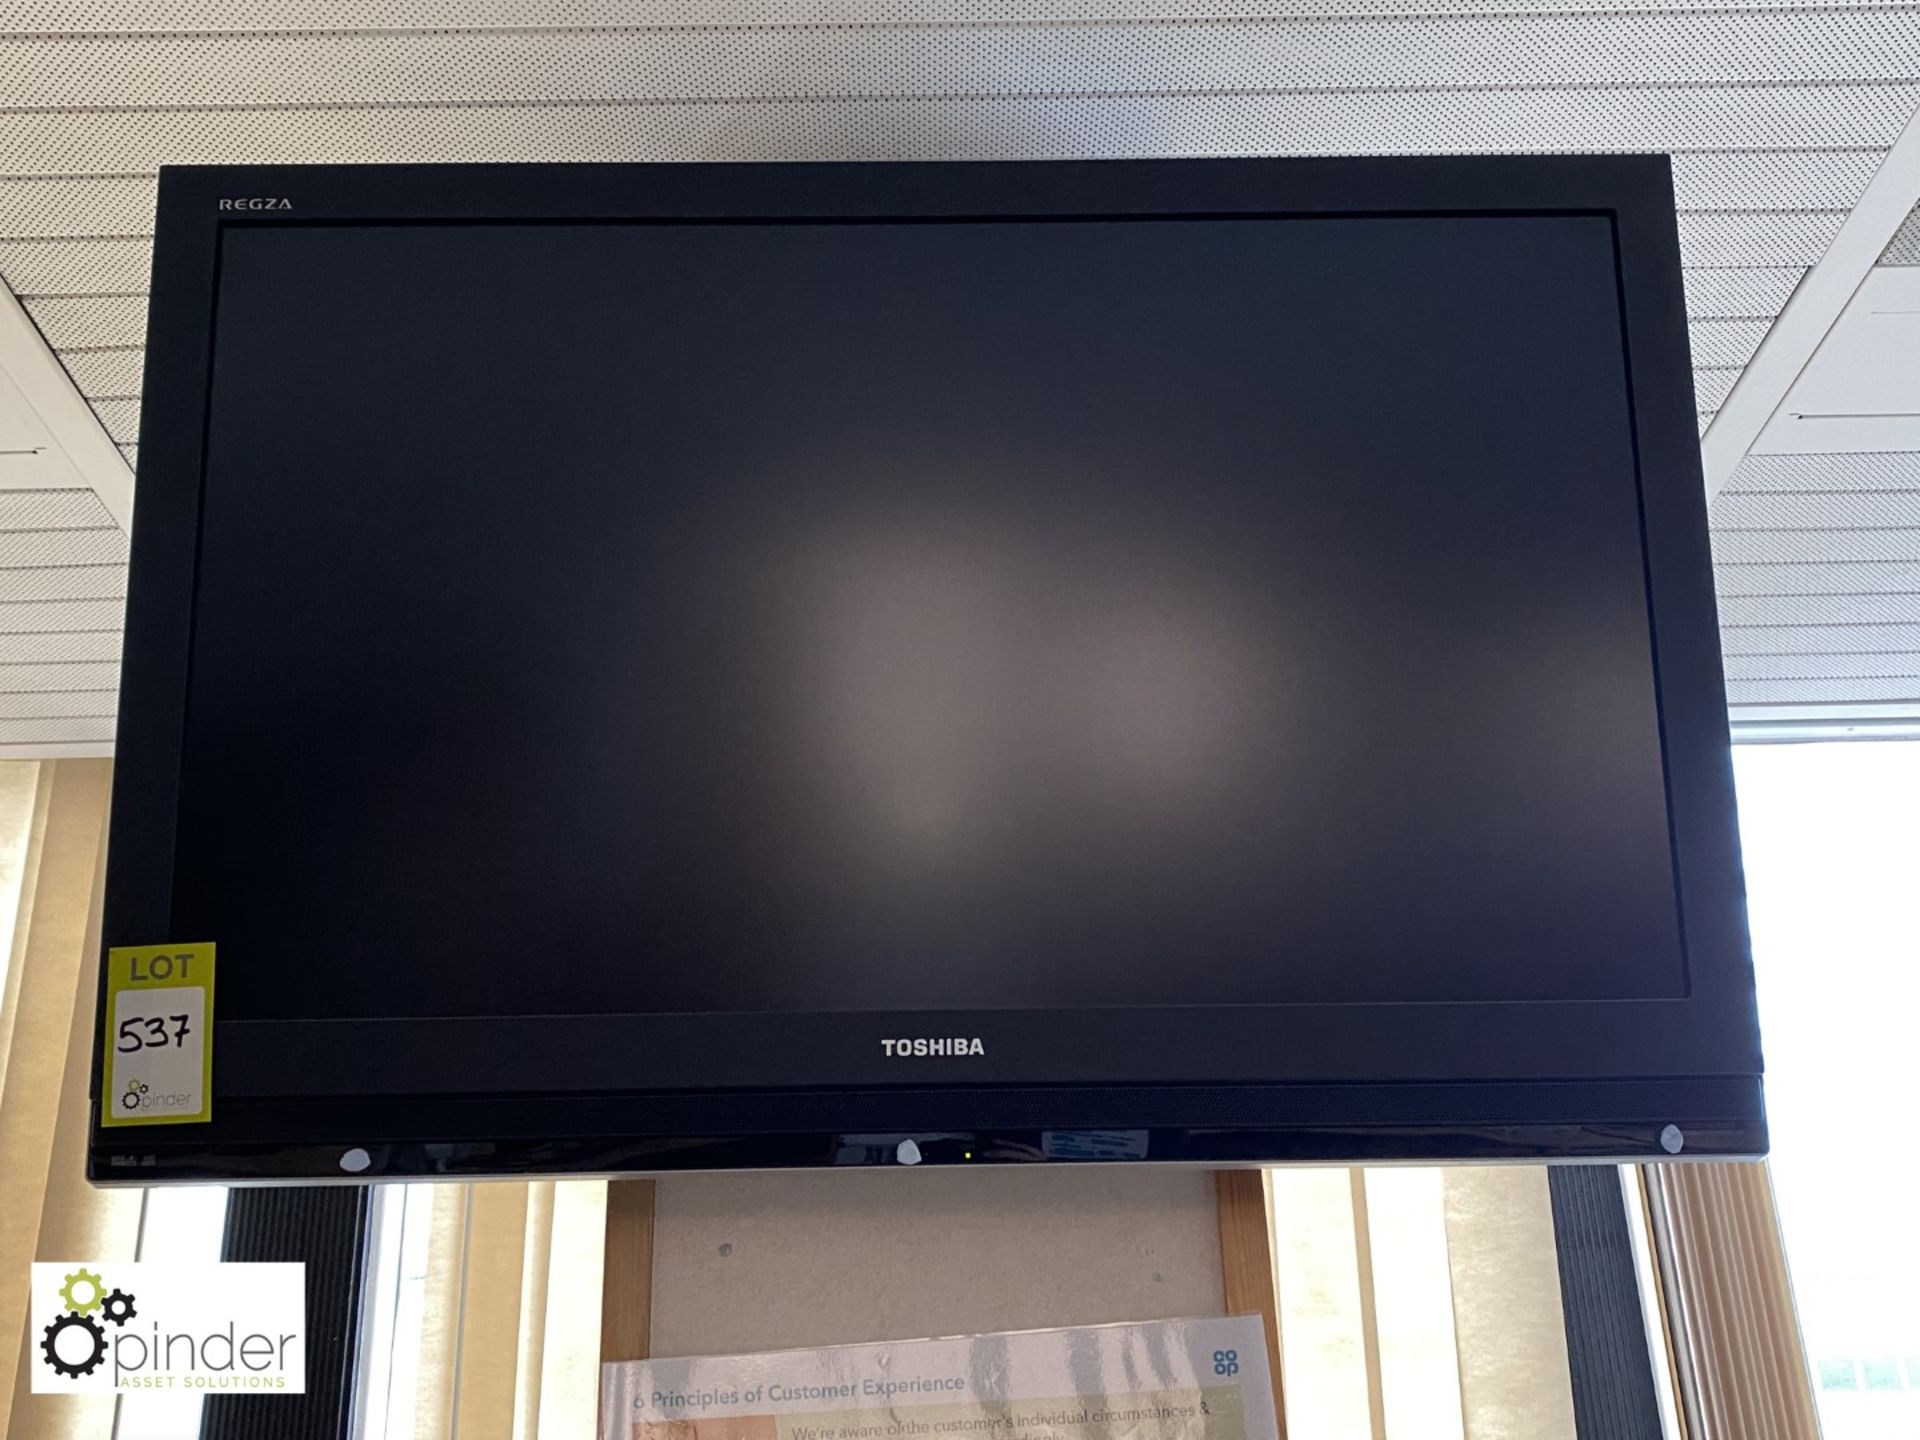 Toshiba 42in Monitor (located in Main Office, 3rd Floor) **** please note this lot needs to be